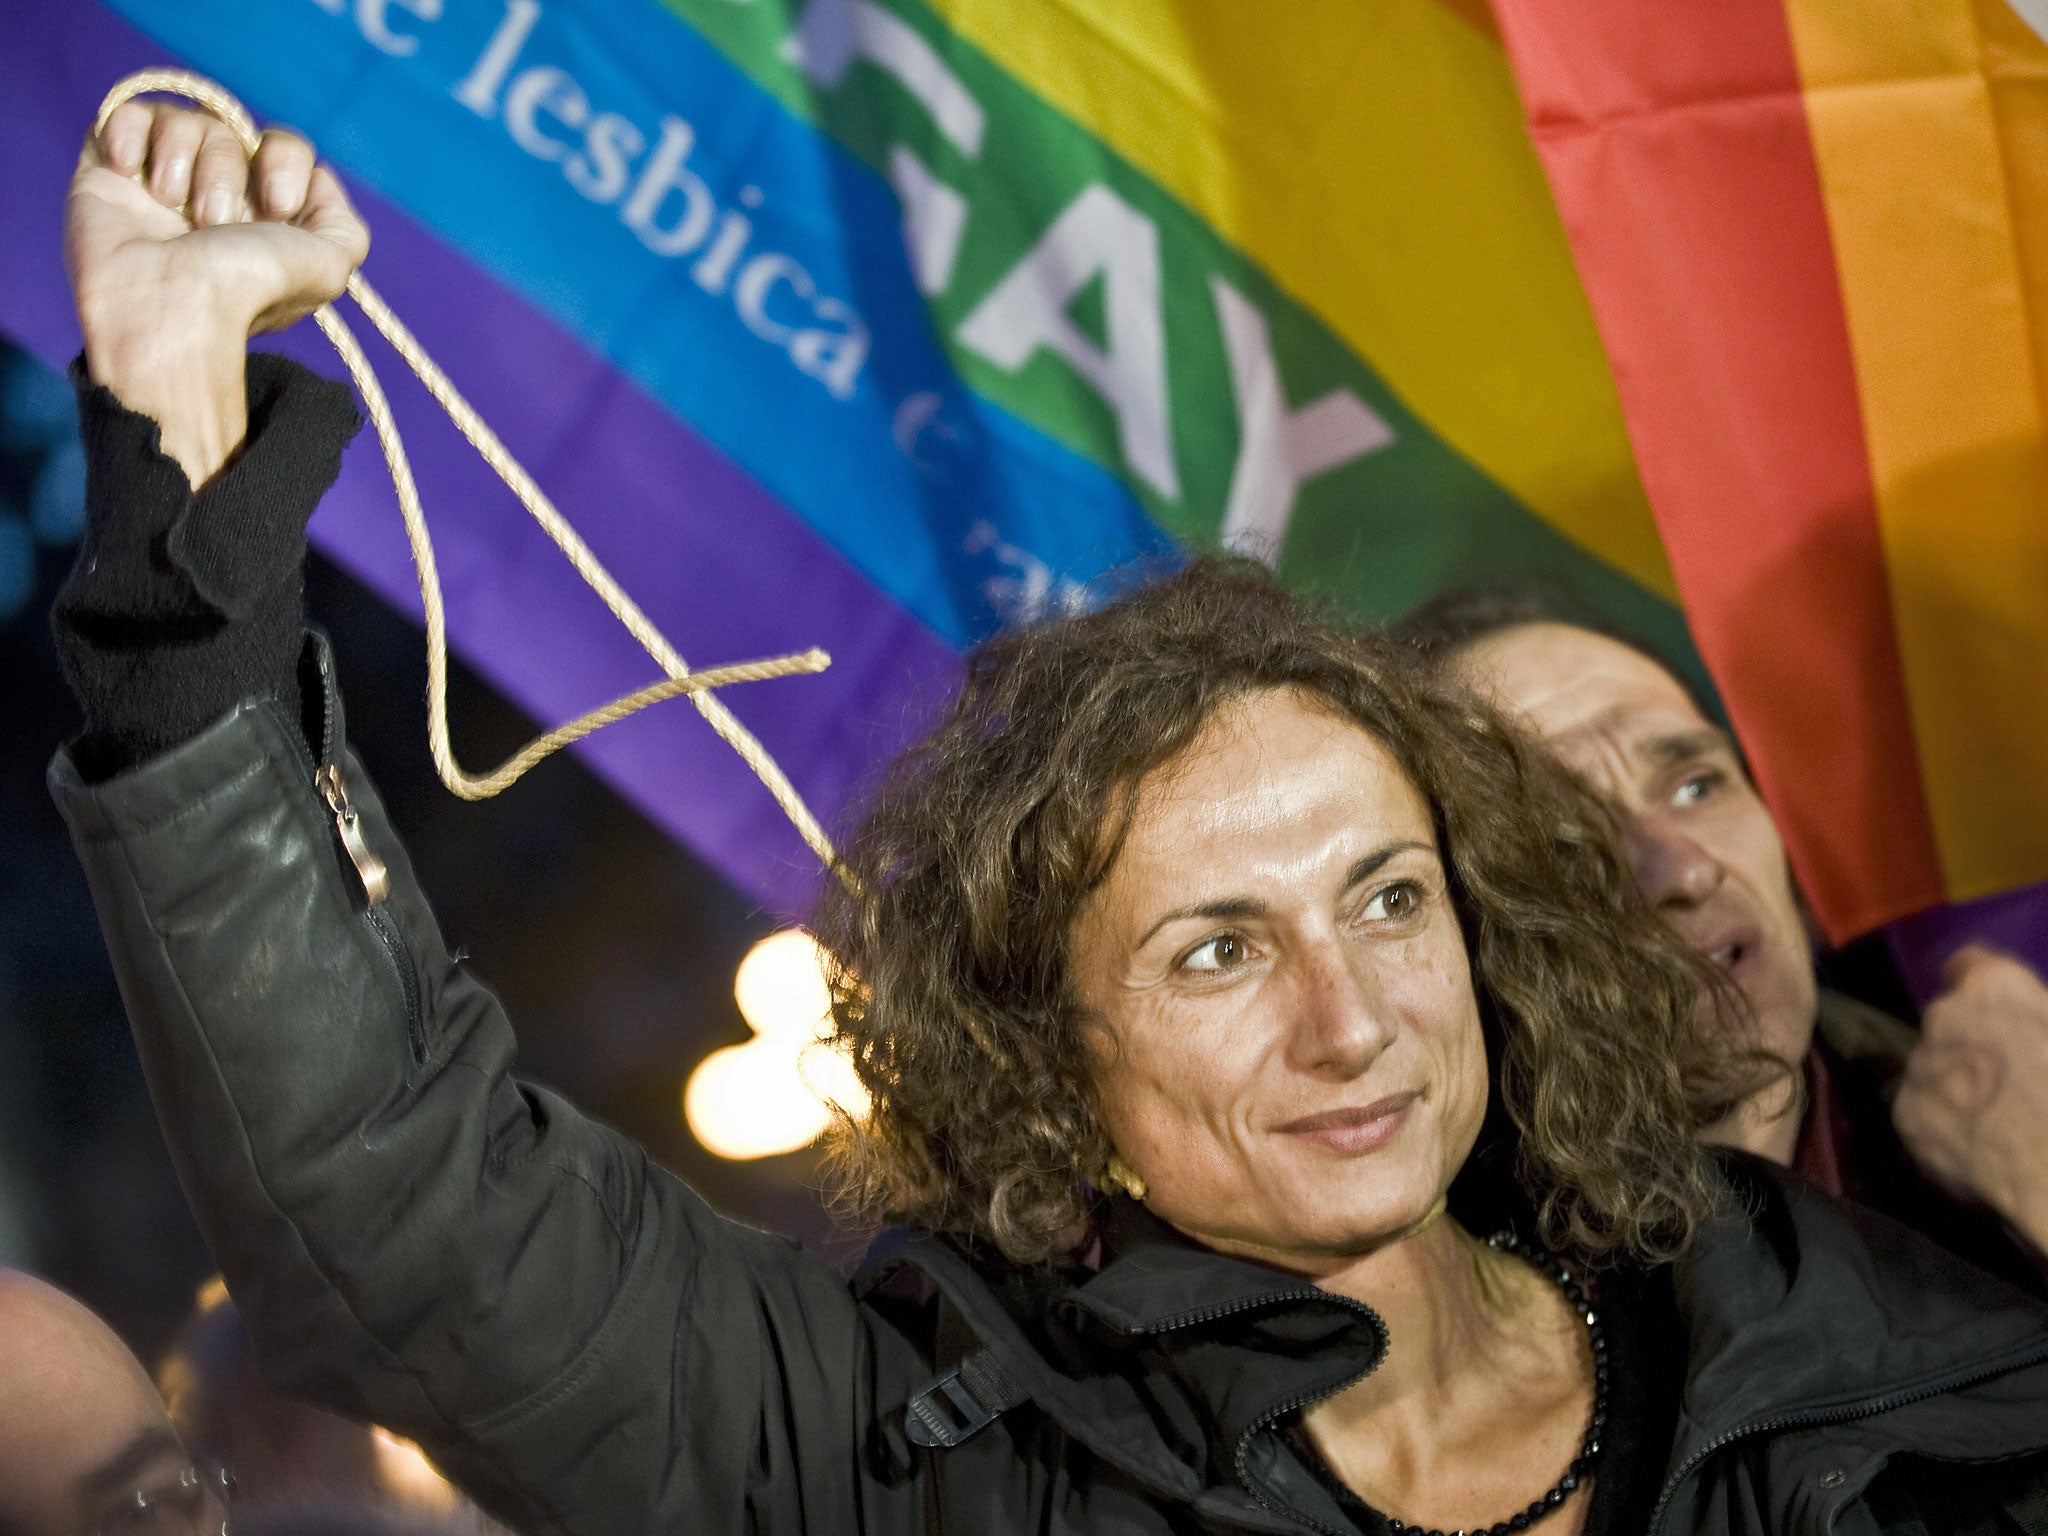 A 2008 image showing the then-Italian MP Vladimir Luxuria taking part in a sit-in at St Peter's Square in the Vatican